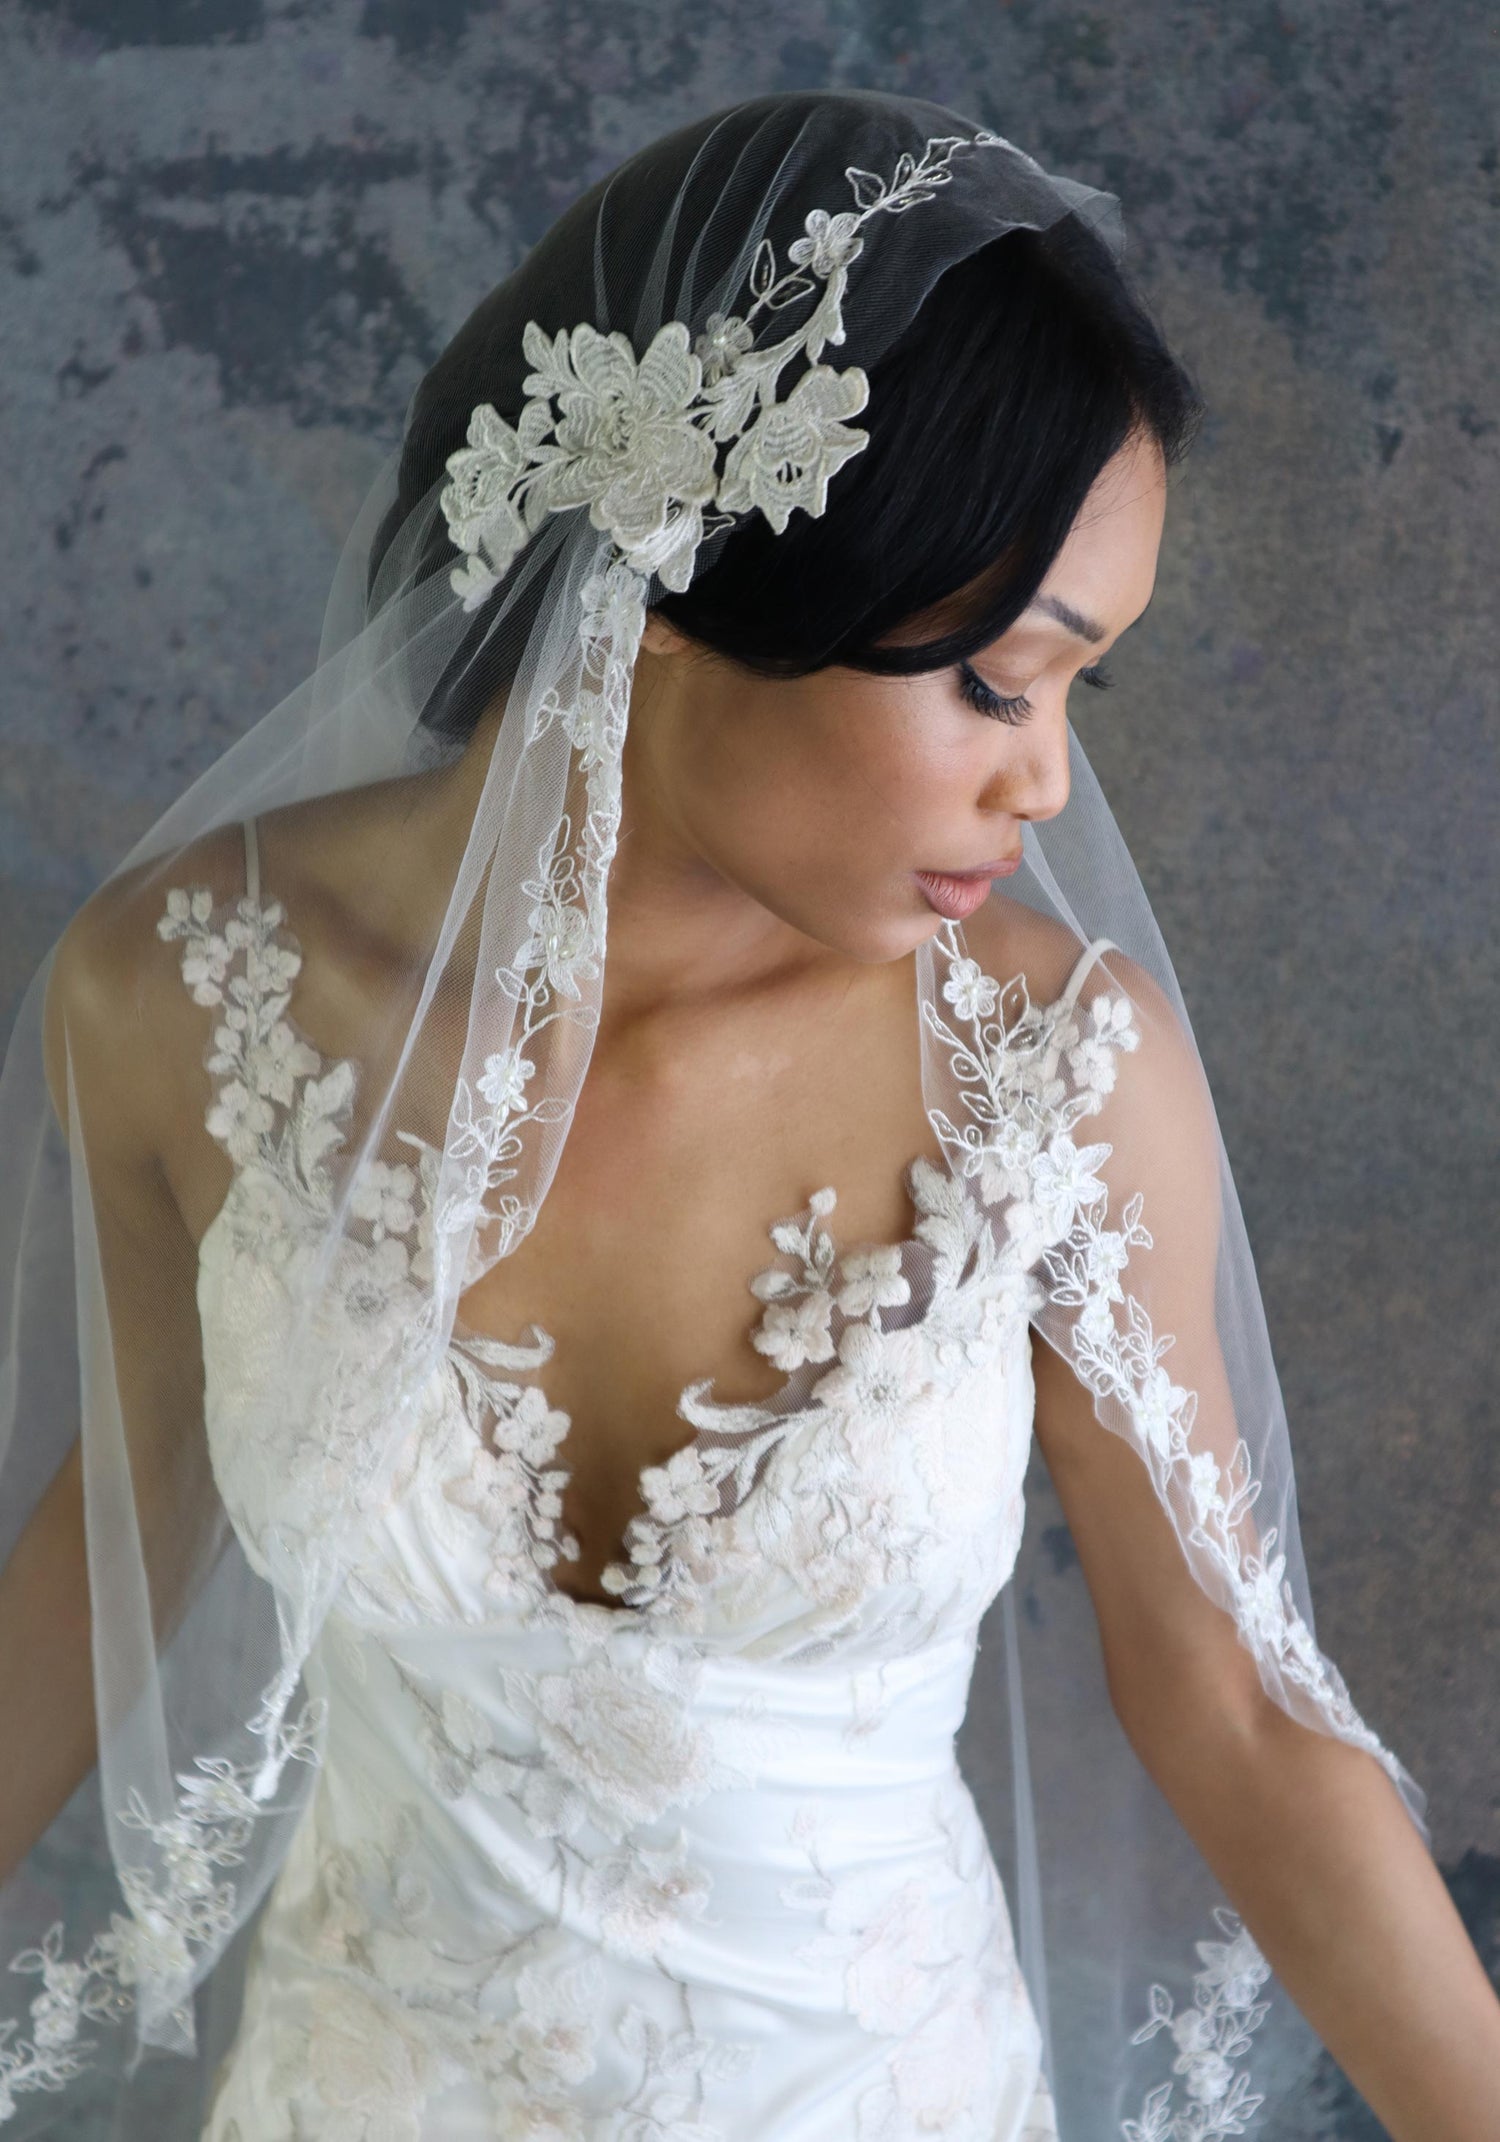 Embroidered Applique Cathedral Veil - Your Wedding Veil Store